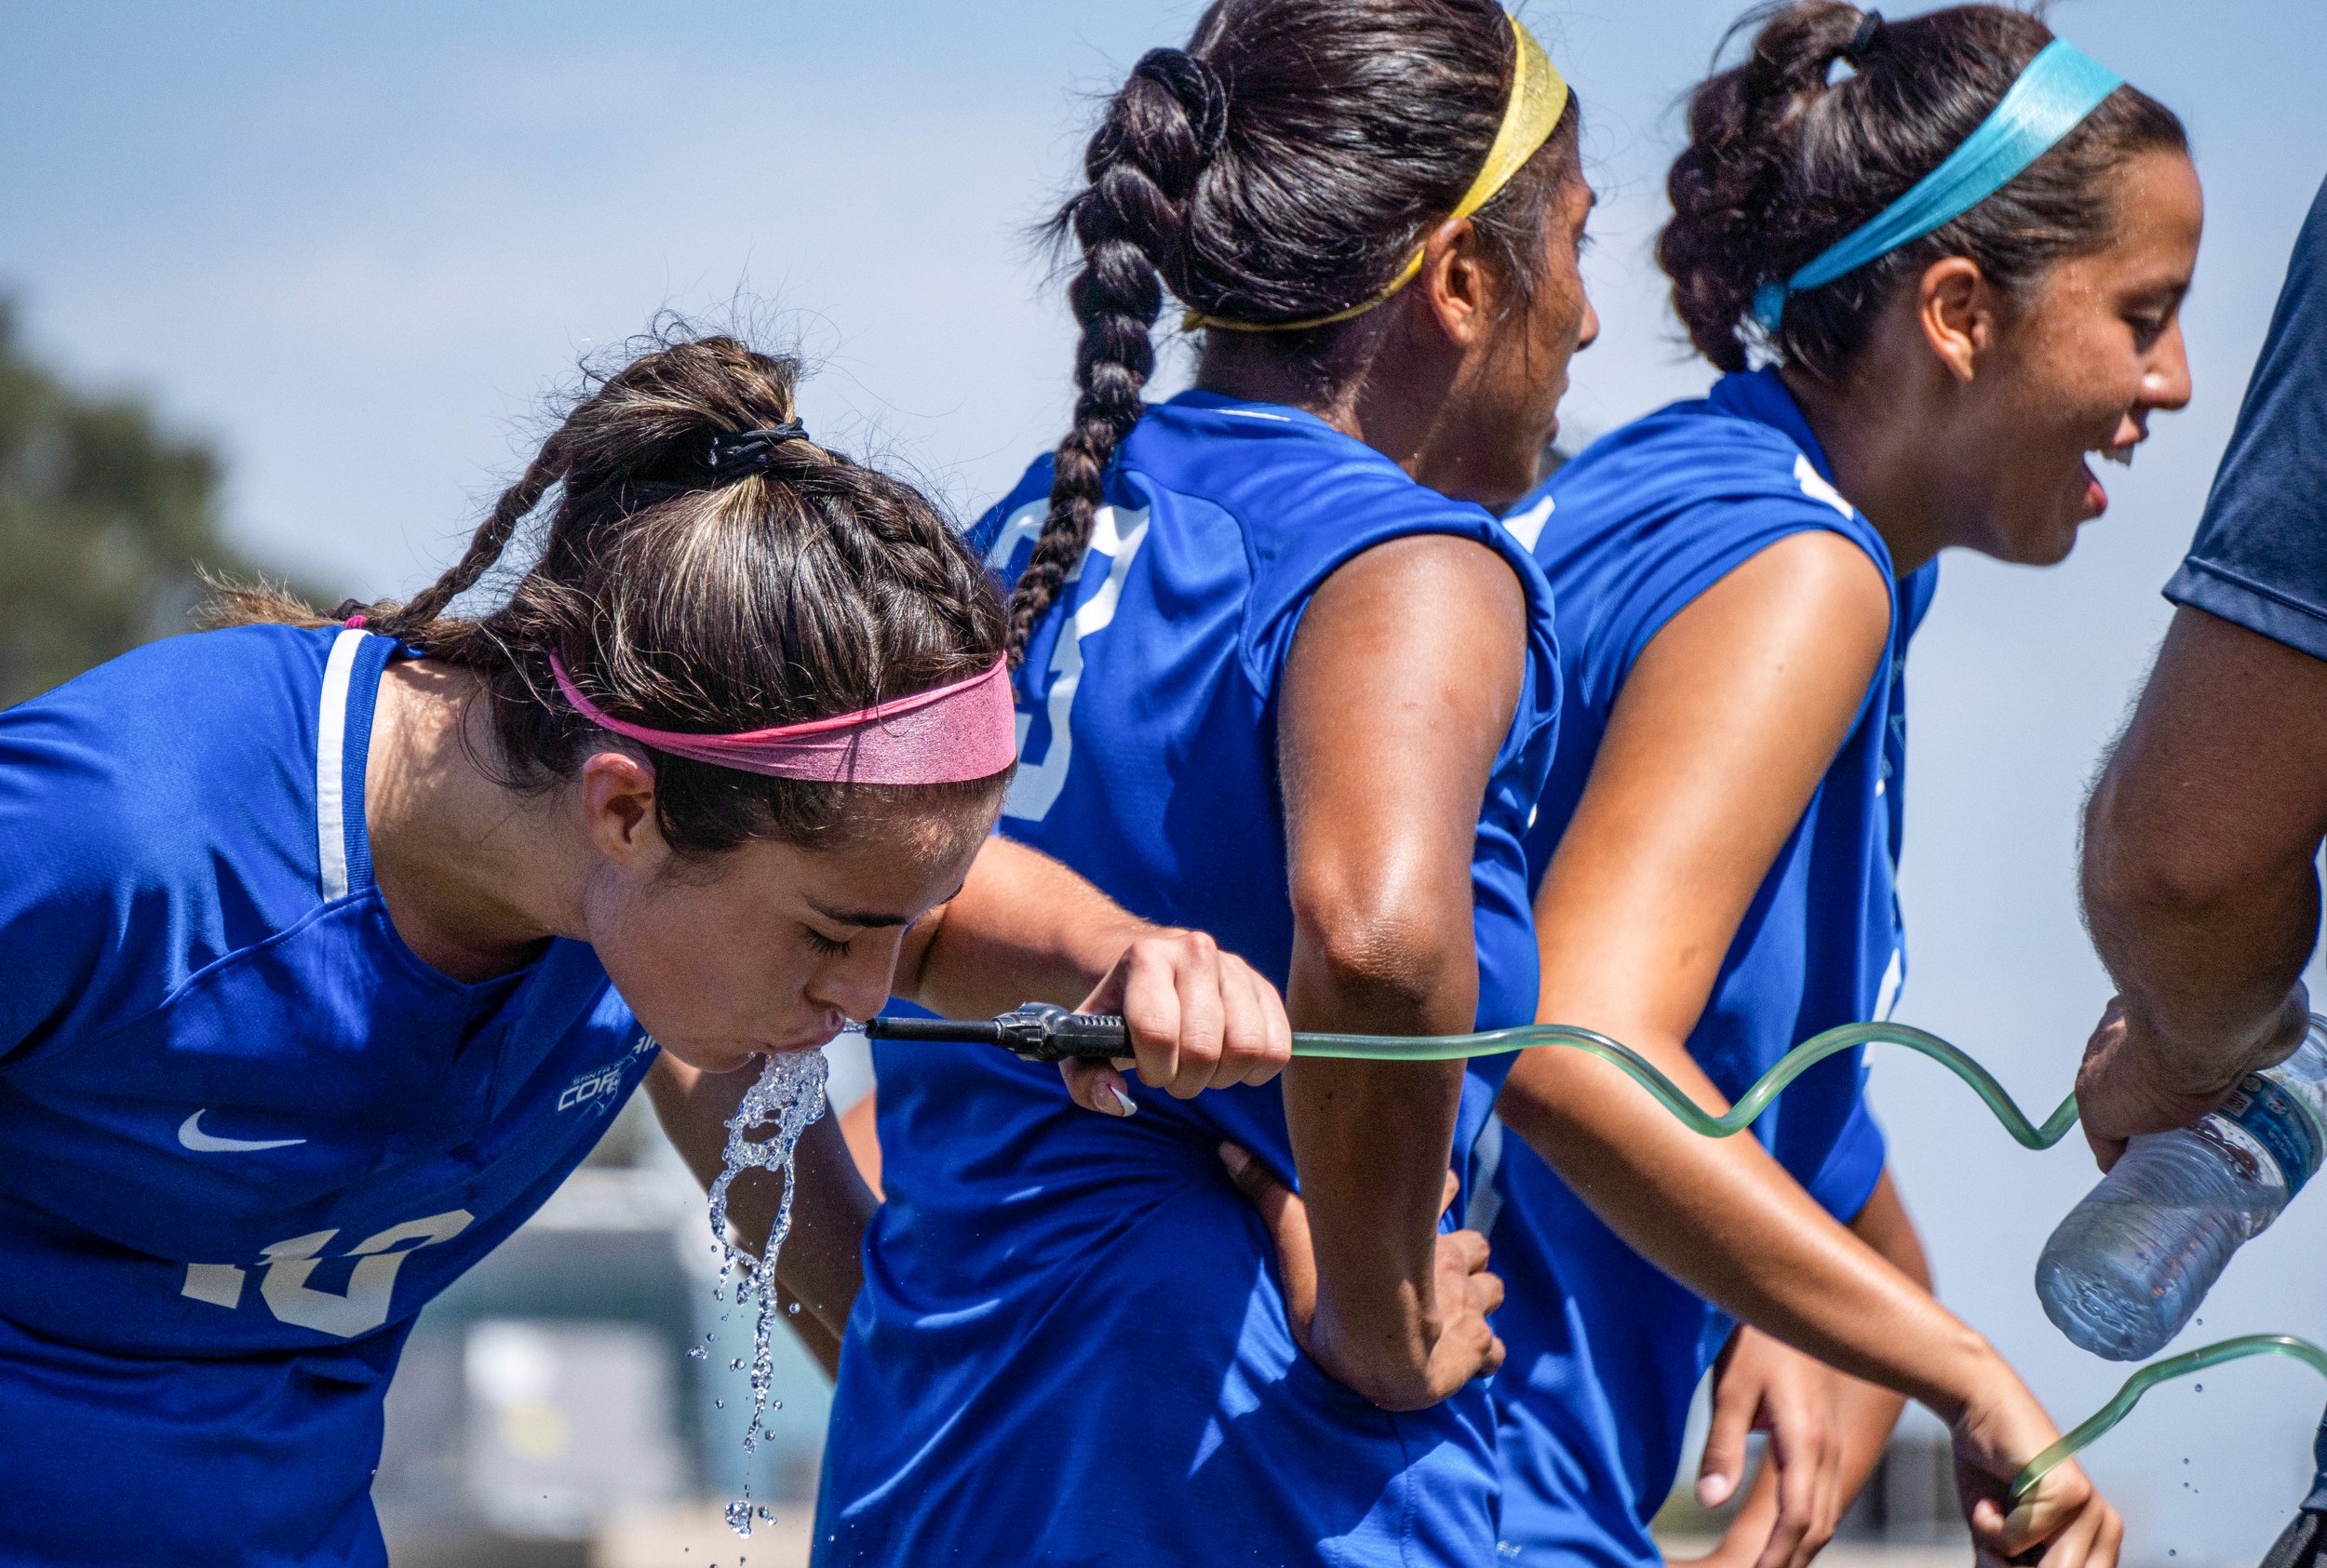  Santa Monica College's Women's Soccer Midfielder Ali Alban (10) quenches her thirst with a spray of refreshing water underneath Santa Monica's hot afternoon sun. The Corsair Field in Santa Monica, Calif. On Friday, September 2, 2022. (Tsen Ee Lin | 